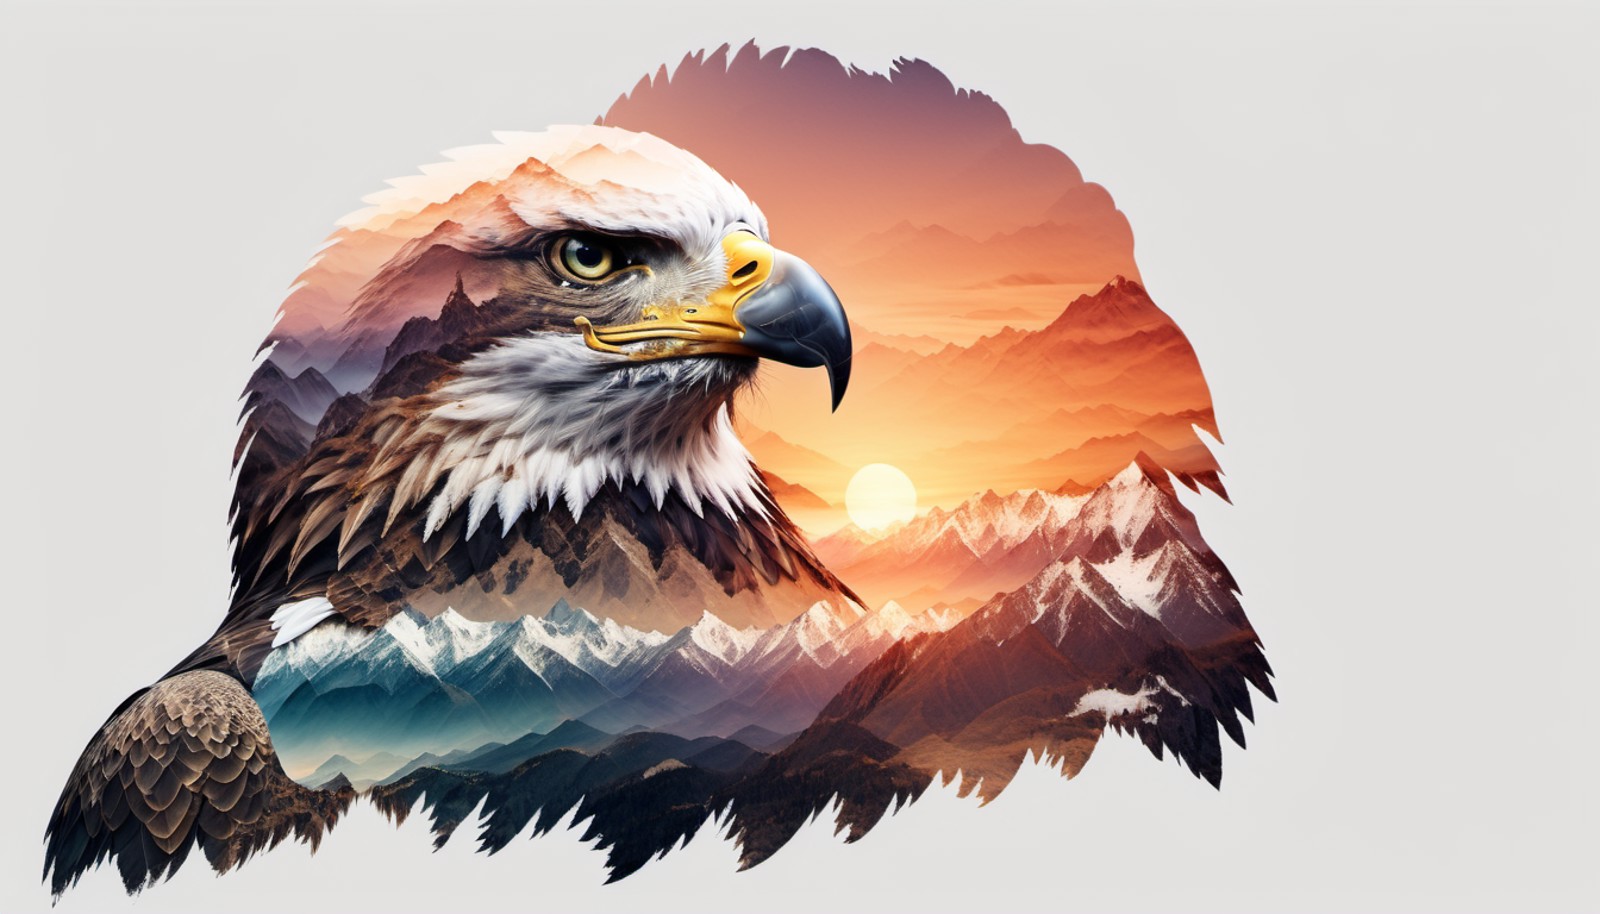 double exposure style, eagle, sunset covered mountains, white background